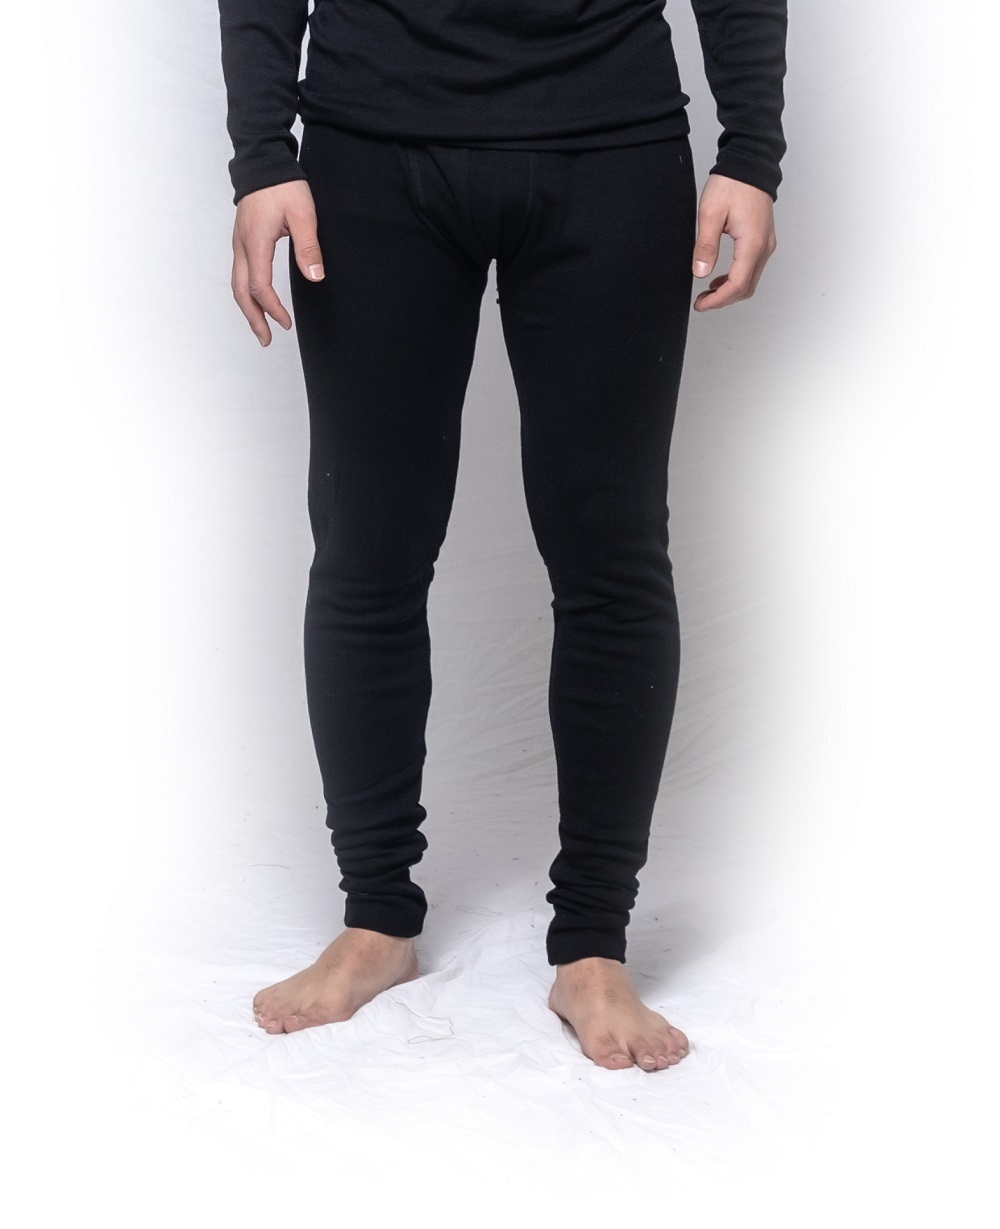 Men's 100% Cotton Long Johns Thermal Underwear Two Pieces Set-Small-Black